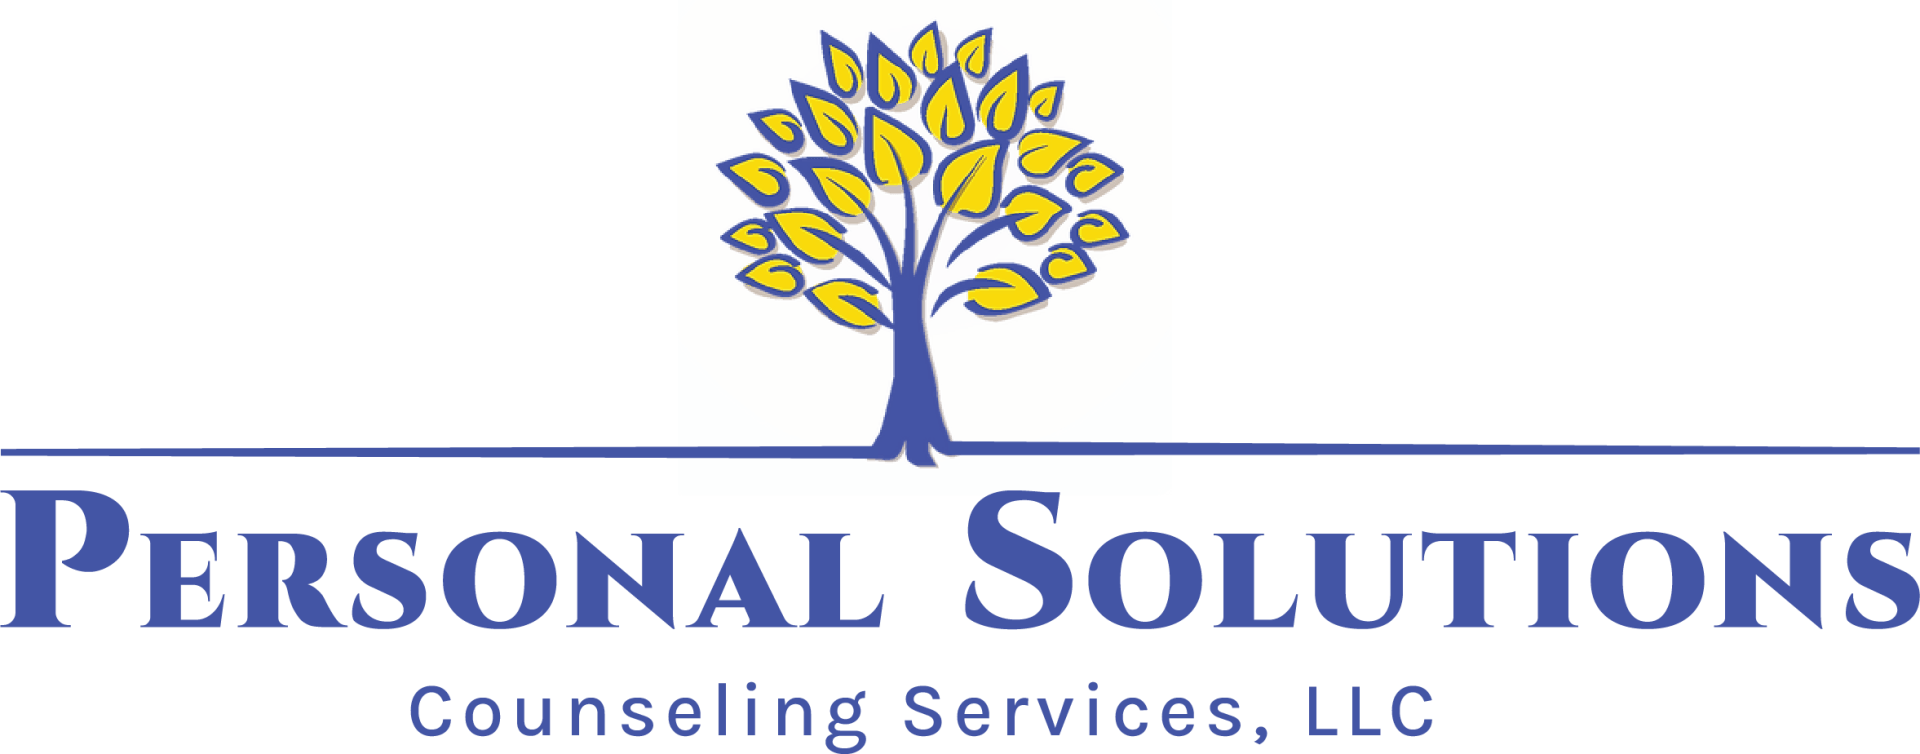 Mental Health Agency Personal Solutions Counseling Services Logo